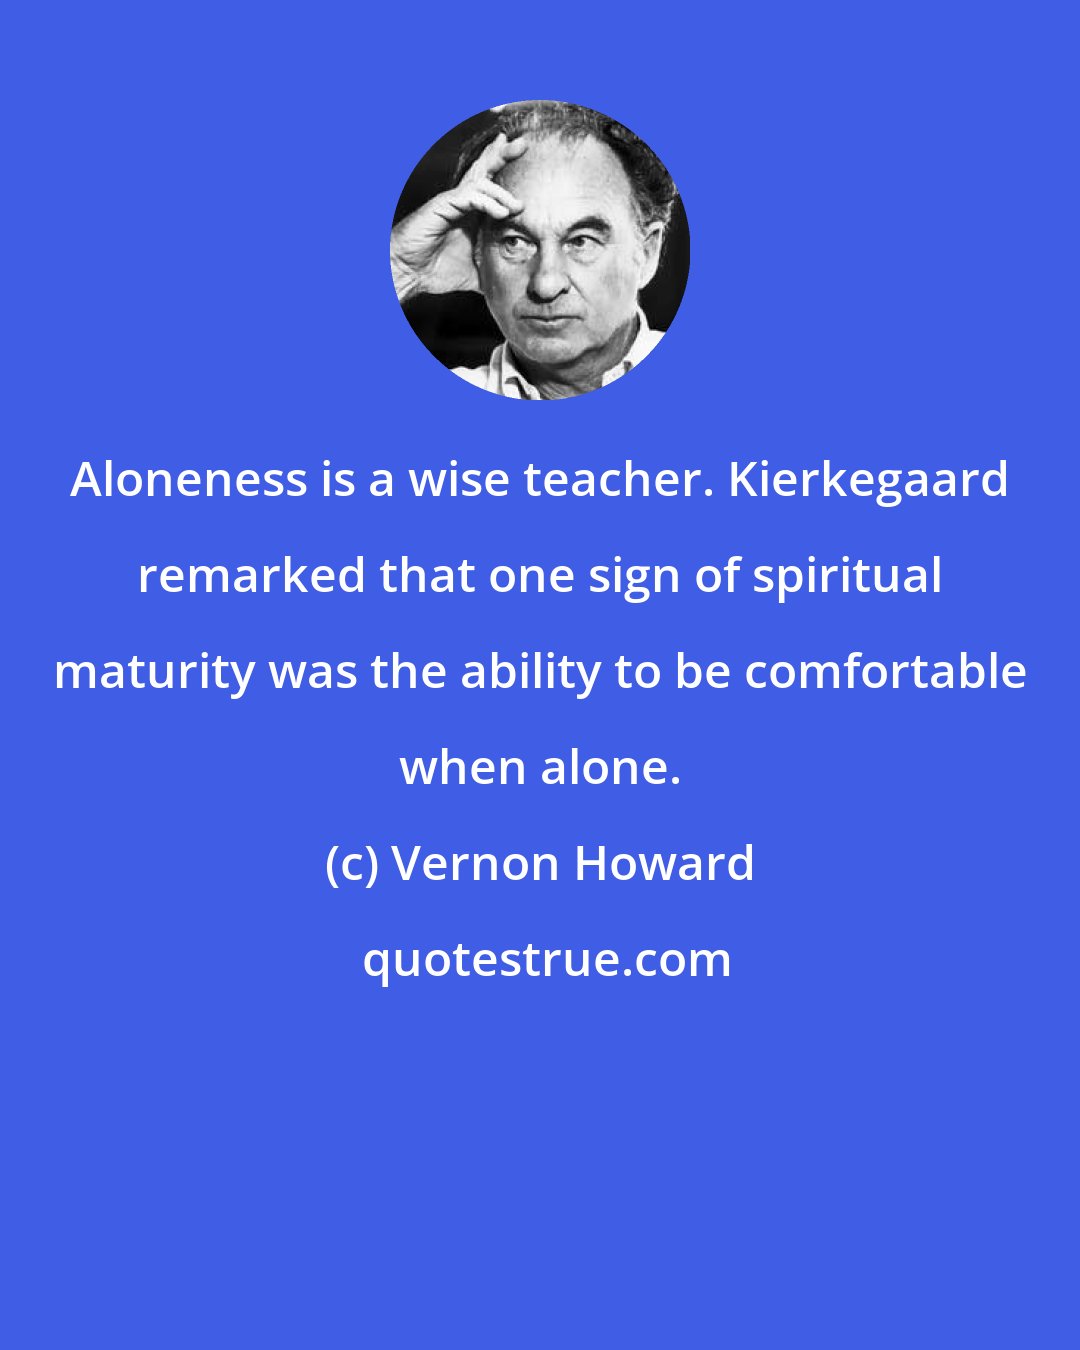 Vernon Howard: Aloneness is a wise teacher. Kierkegaard remarked that one sign of spiritual maturity was the ability to be comfortable when alone.